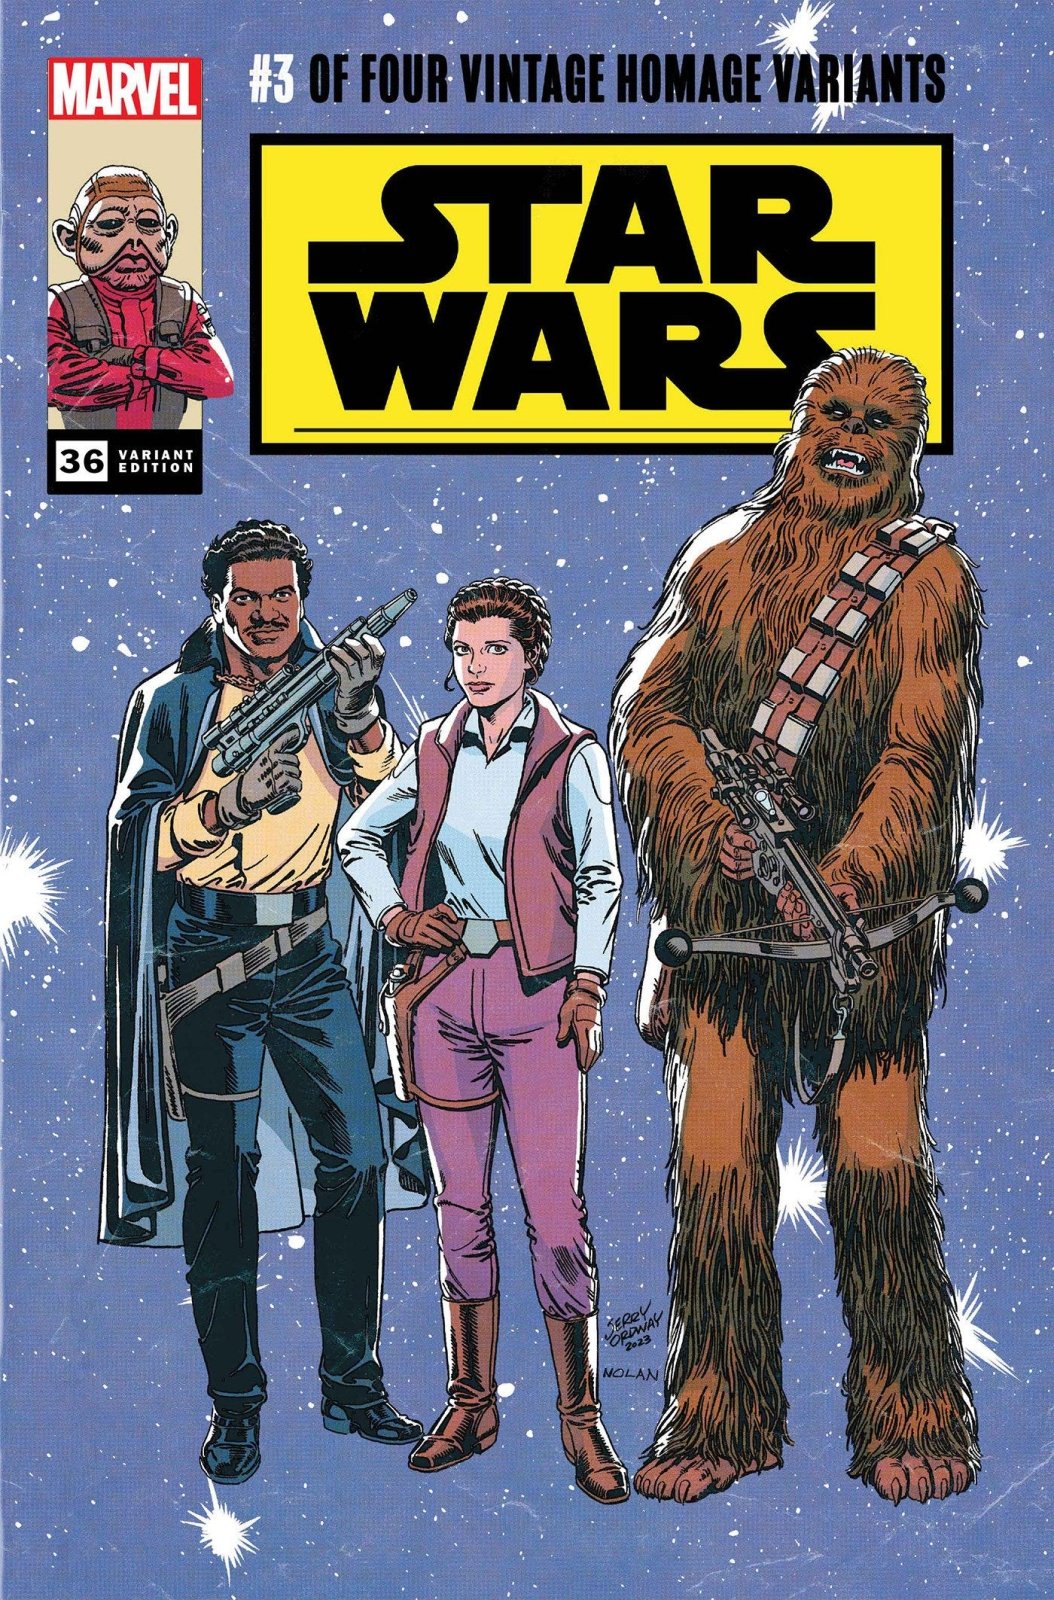 Star Wars 36 Jerry Ordway Classic Trade Dress Variant - The Fourth Place